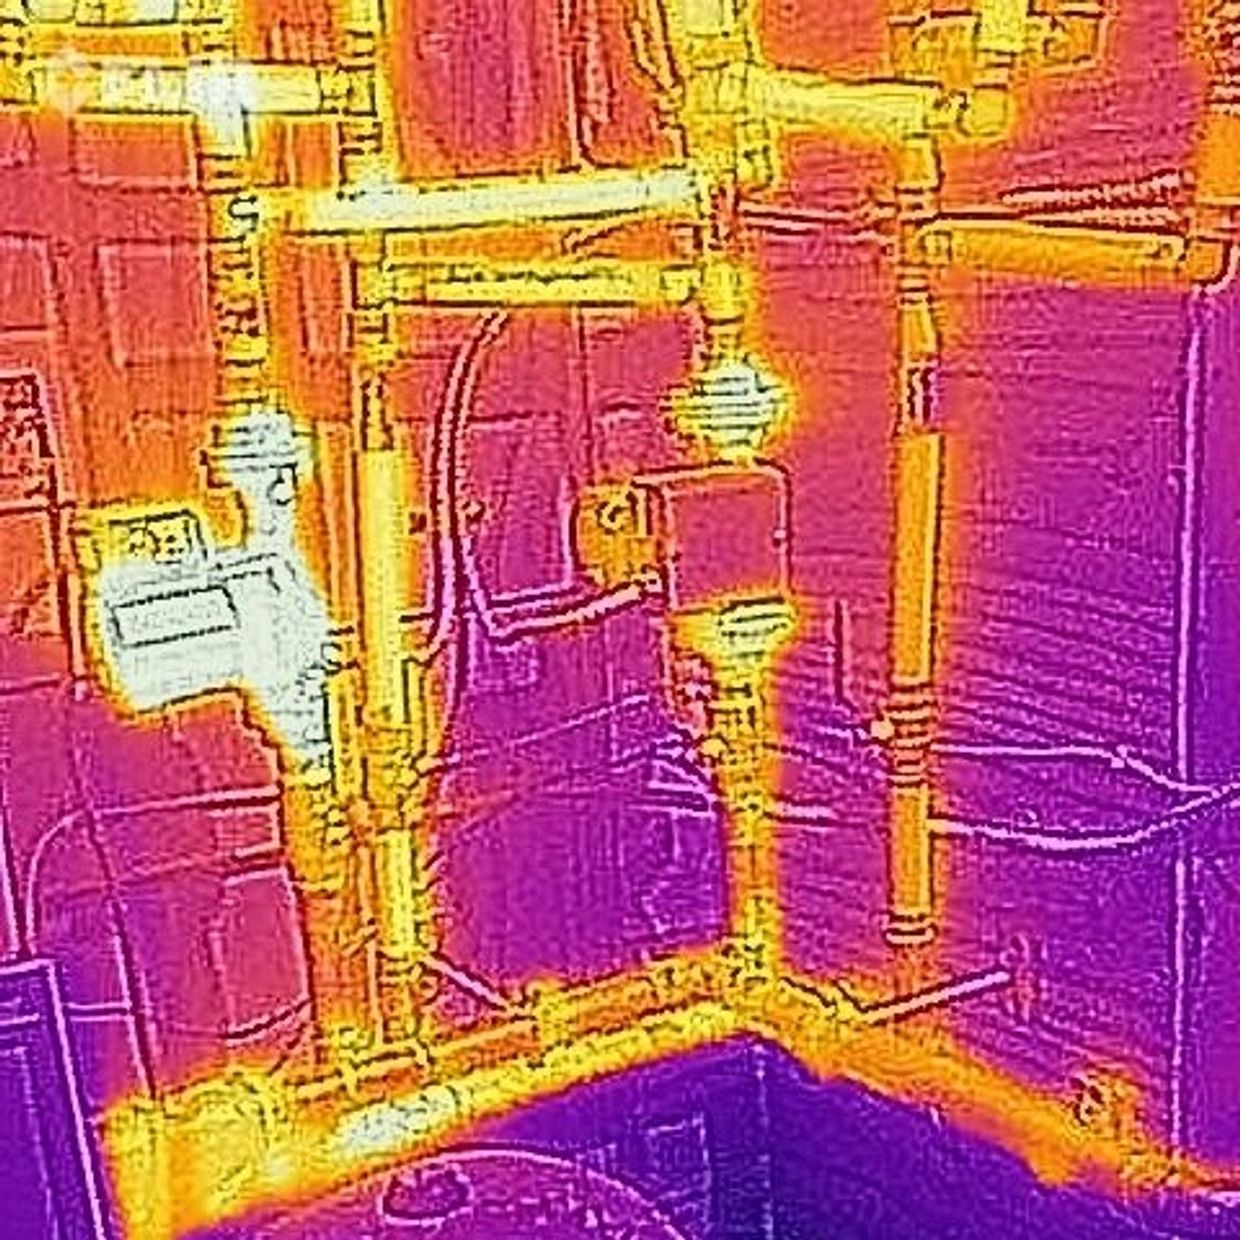 Twin City Boiler troubleshooting a boiler not heating properly with a thermal imaging camera.